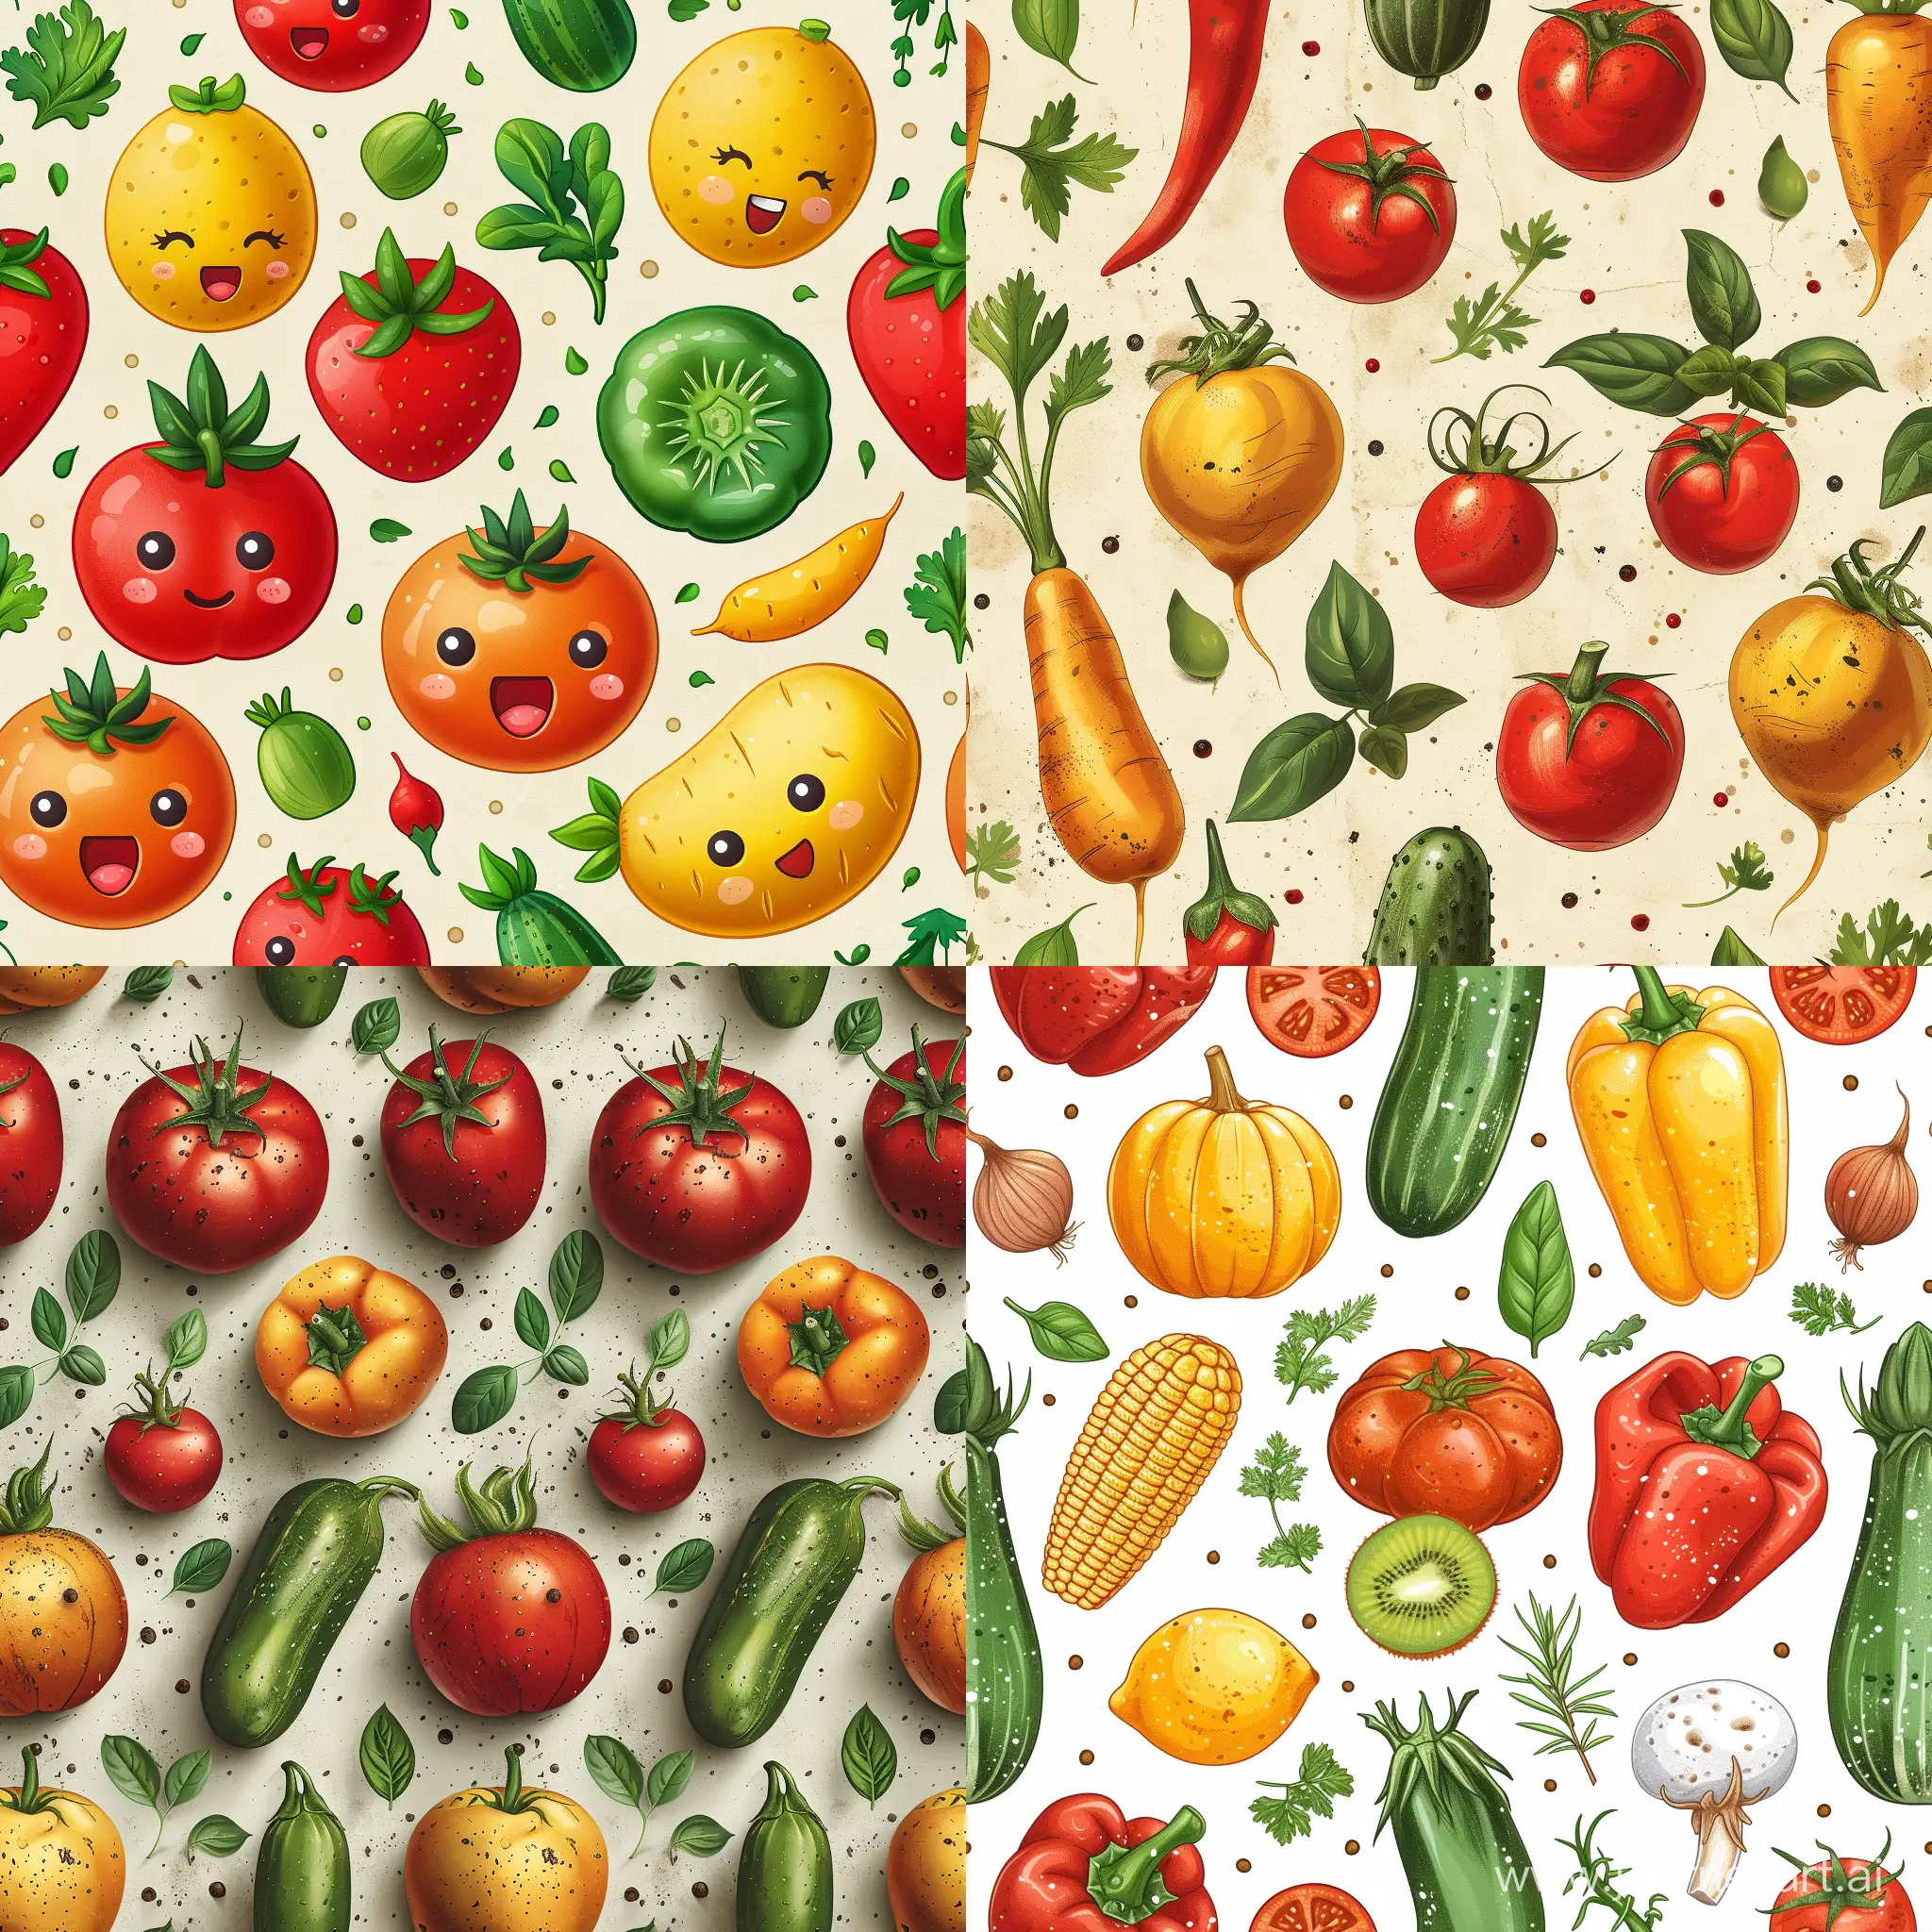 Colorful-Vegetable-Pattern-Abstract-Art-with-Vibrant-Organic-Shapes